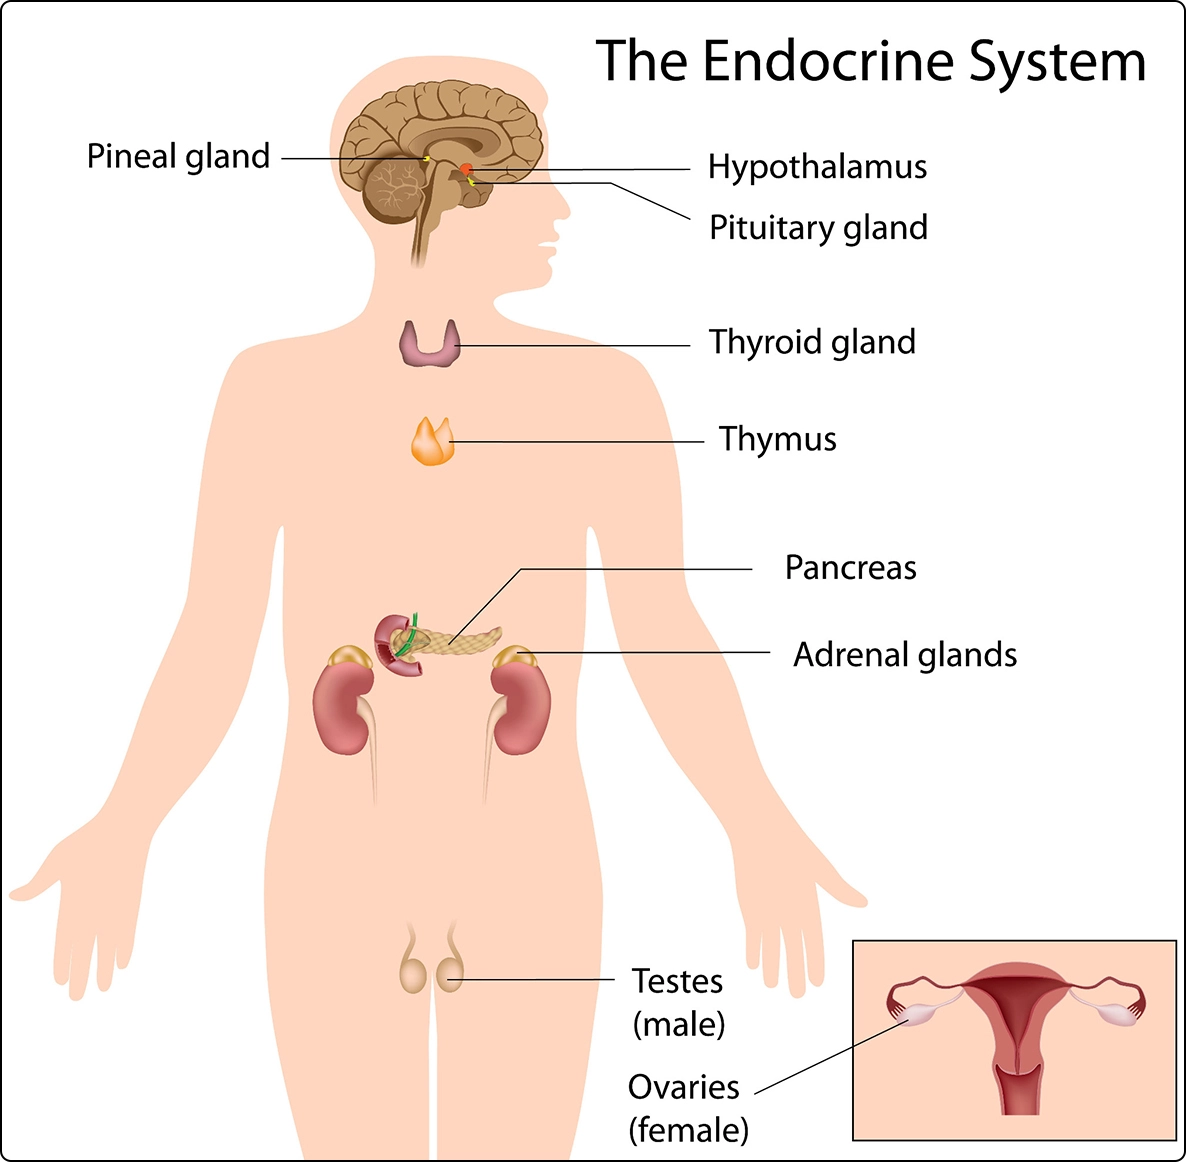 the endocrine system which supports metabolism